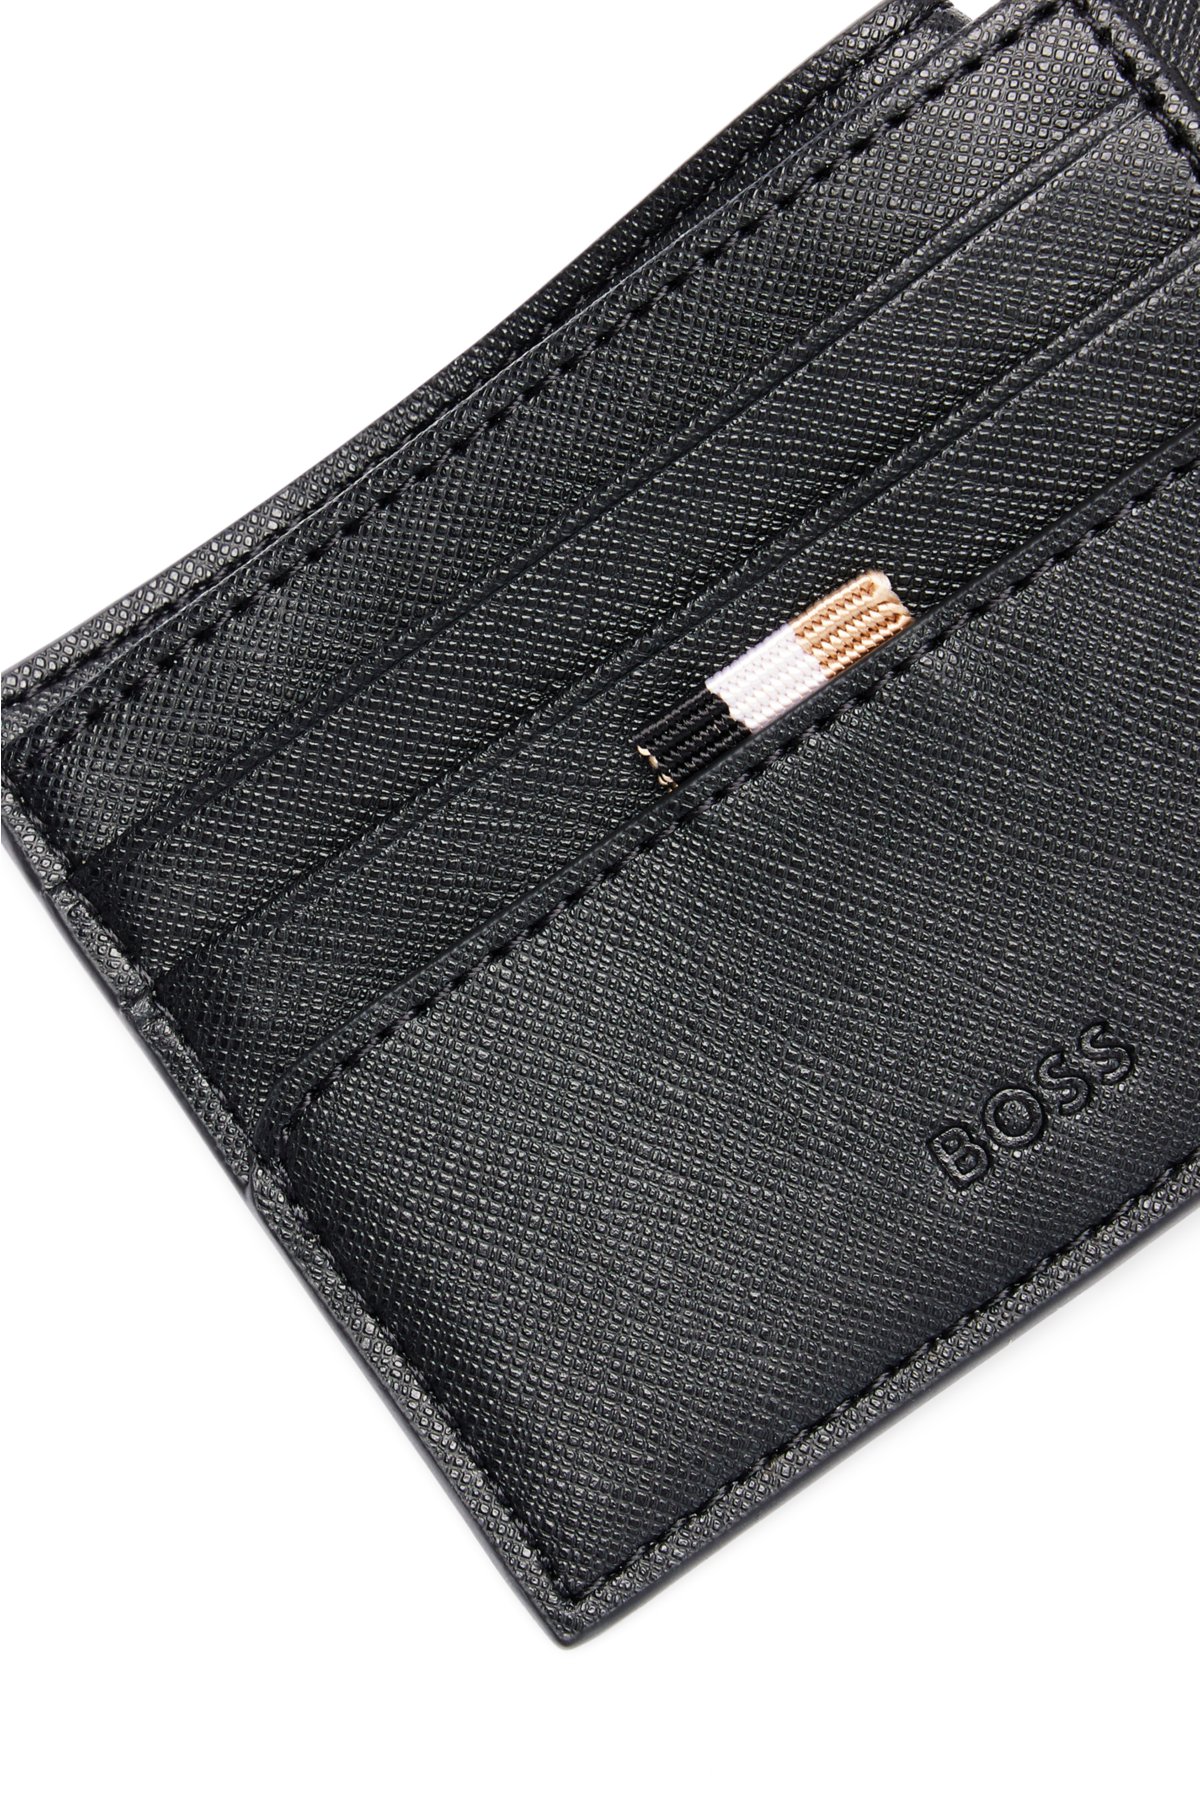 Structured folding wallet with logo, Black